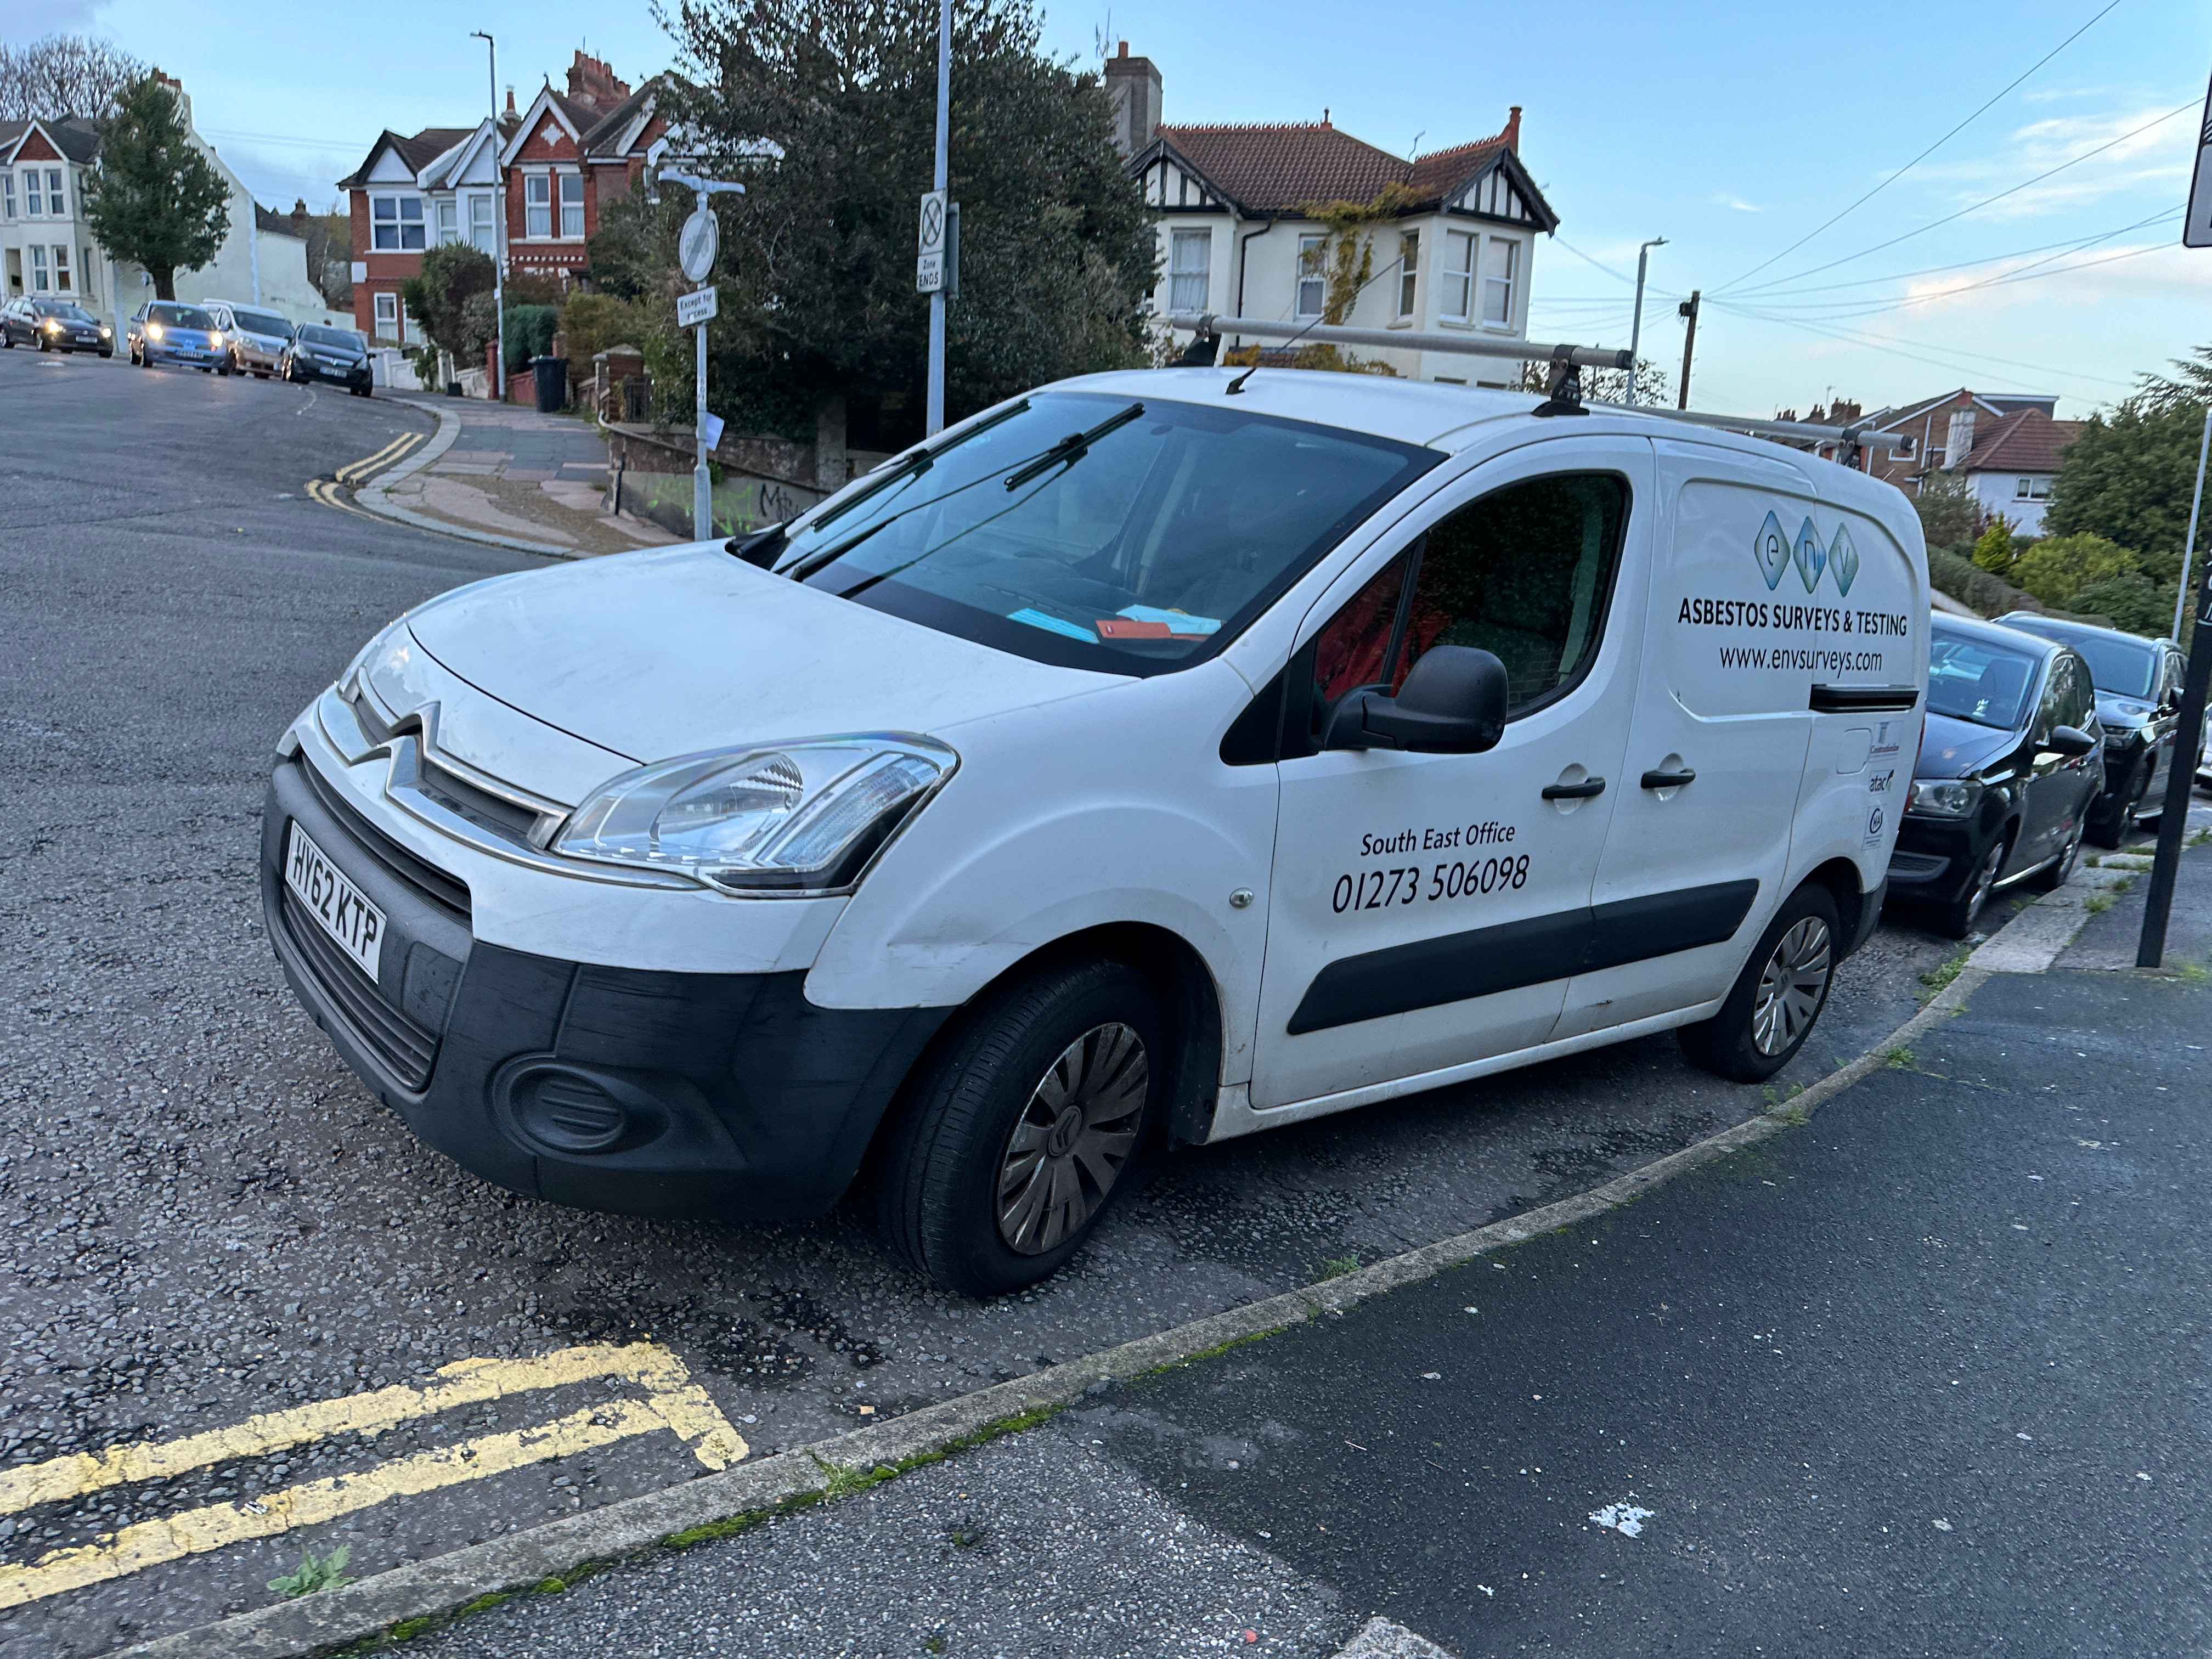 Photograph of HY62 KTP - a White Citroen Berlingo parked in Hollingdean by a non-resident. The third of six photographs supplied by the residents of Hollingdean.